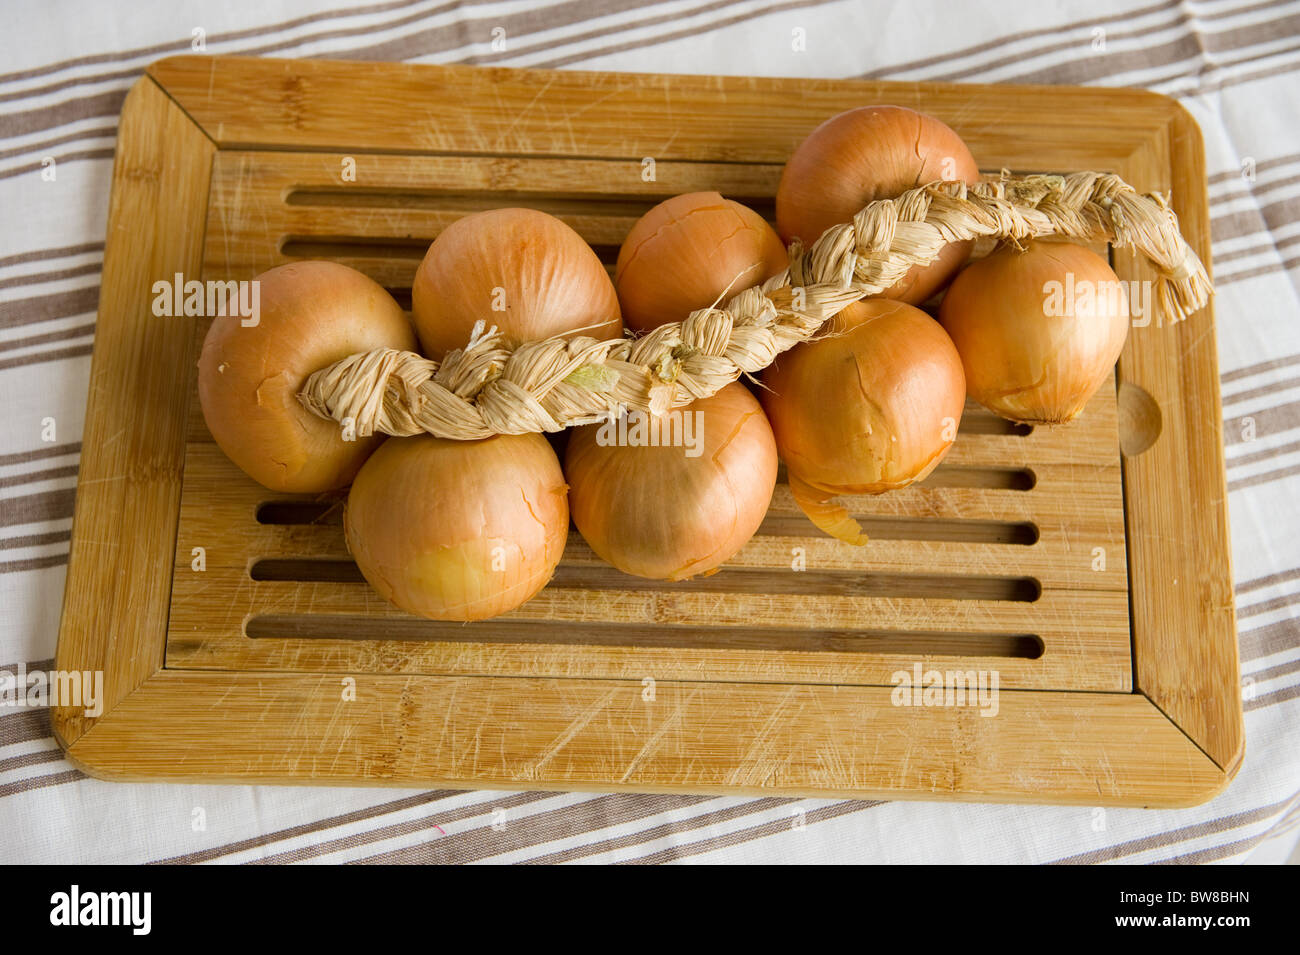 Cord with onions in rural still life Stock Photo